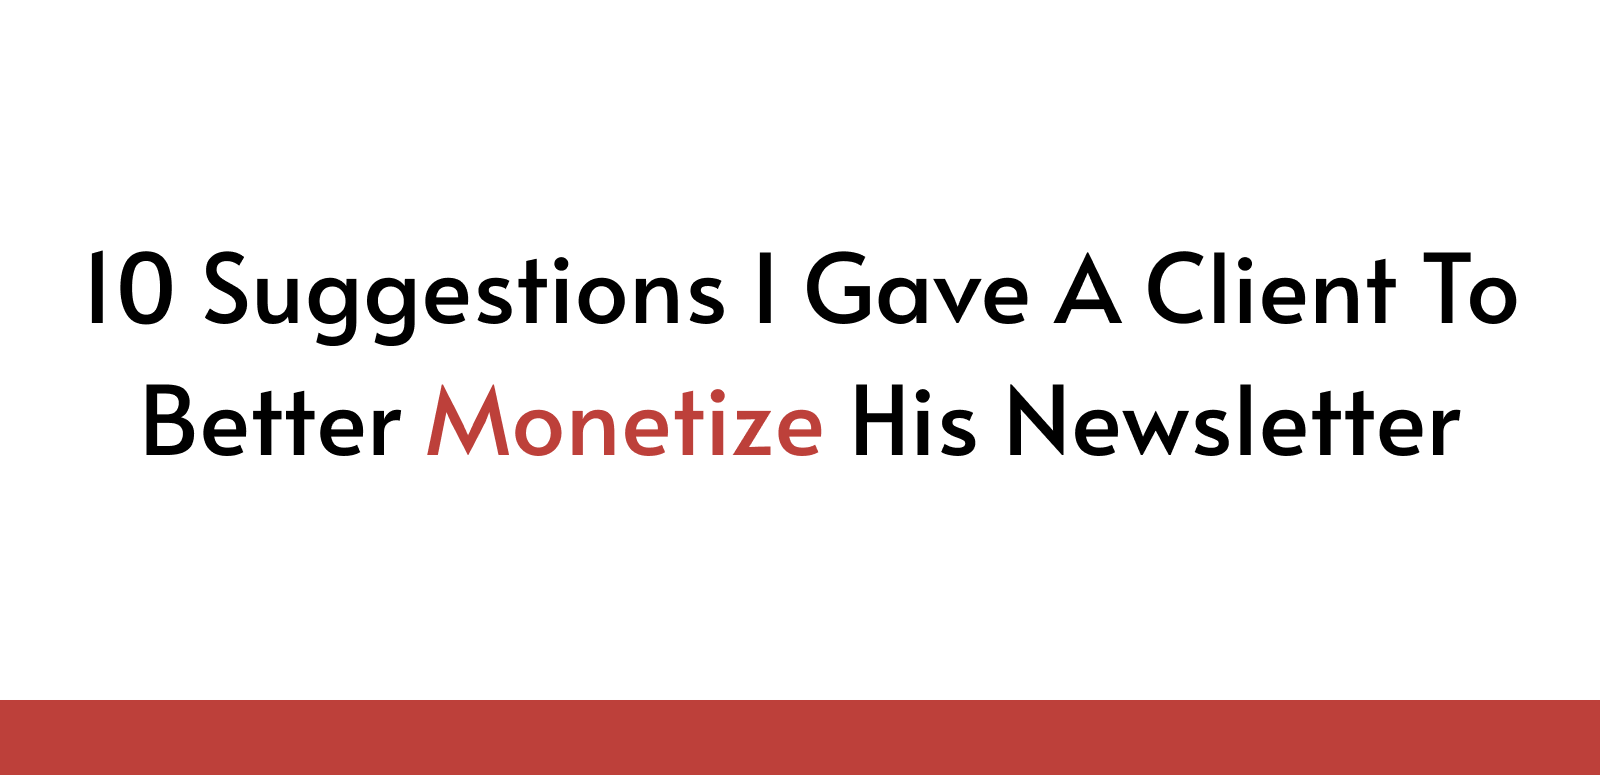 10 Suggestions I Gave A Client To Better Monetize His Newsletter